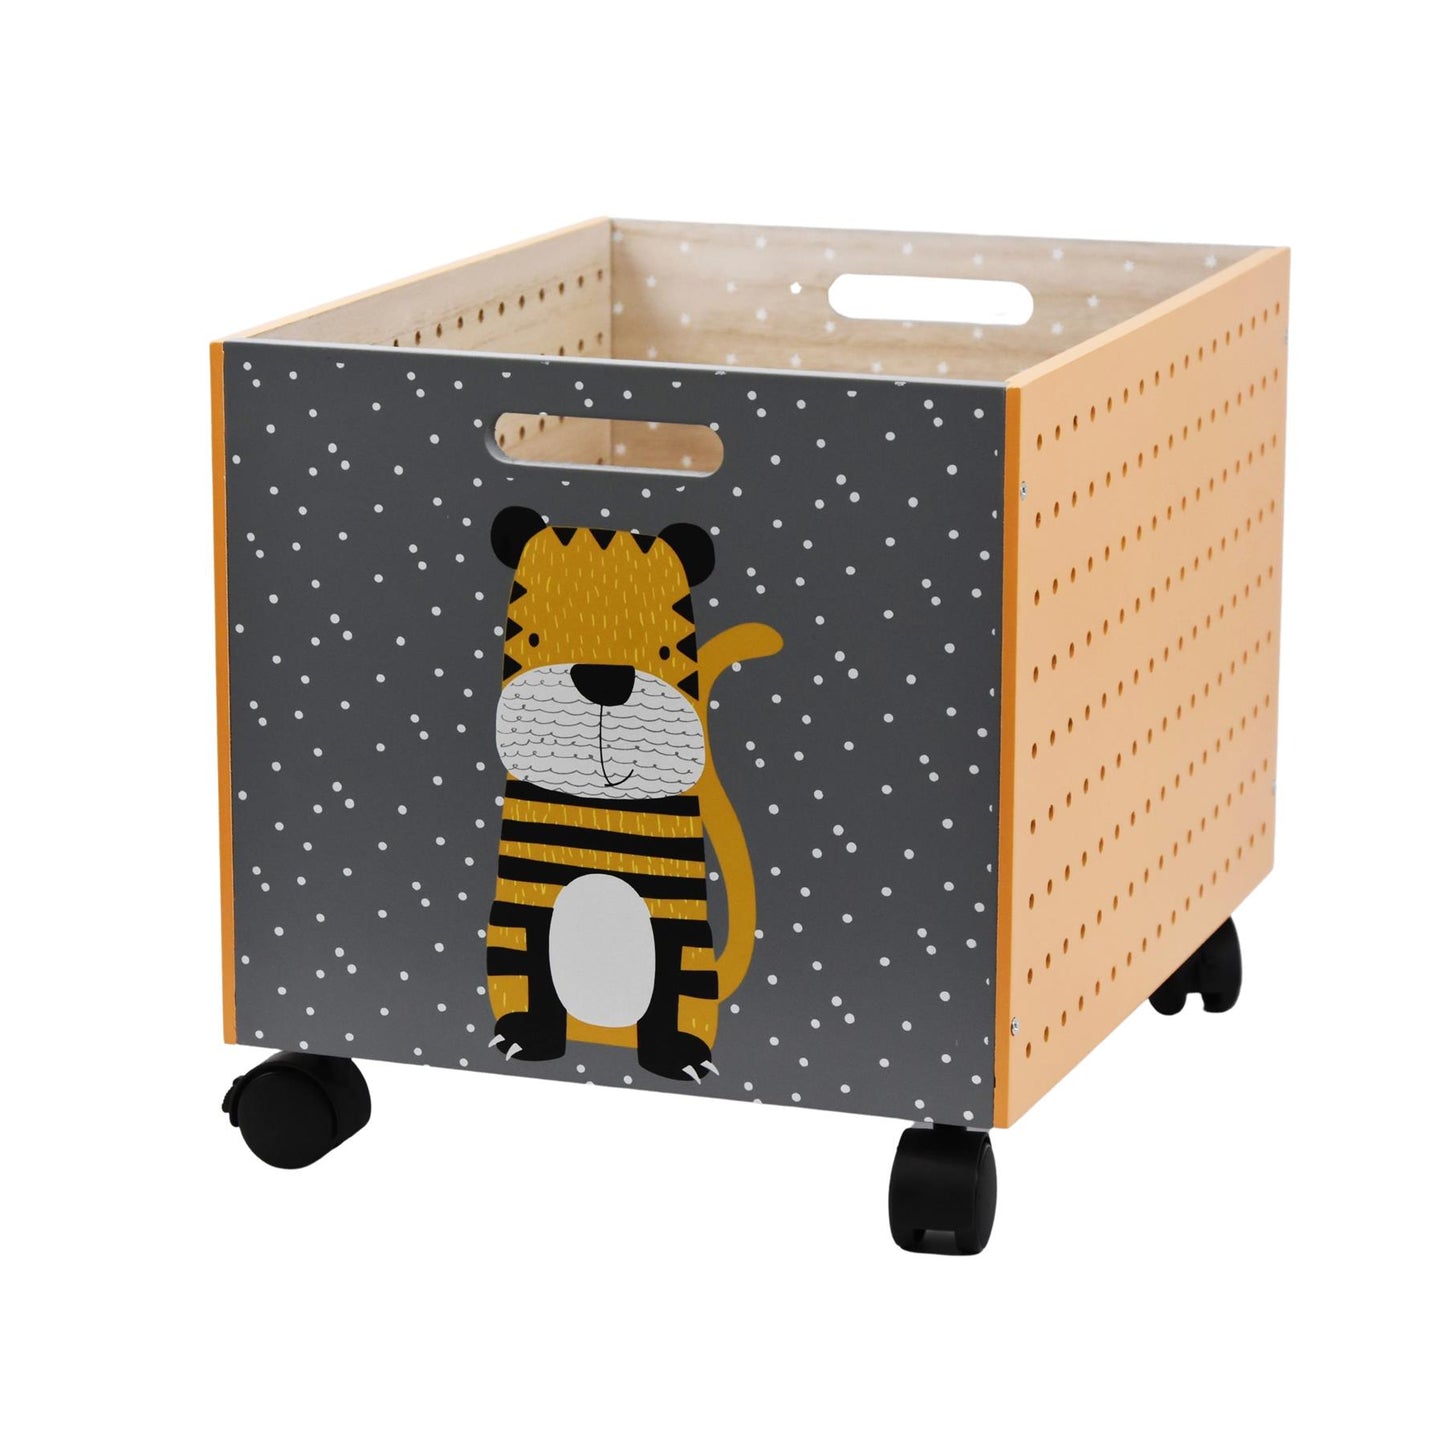 Tiger Design Kids Wooden Storage Chest On Wheels by The Magic Toy Shop - UKBuyZone